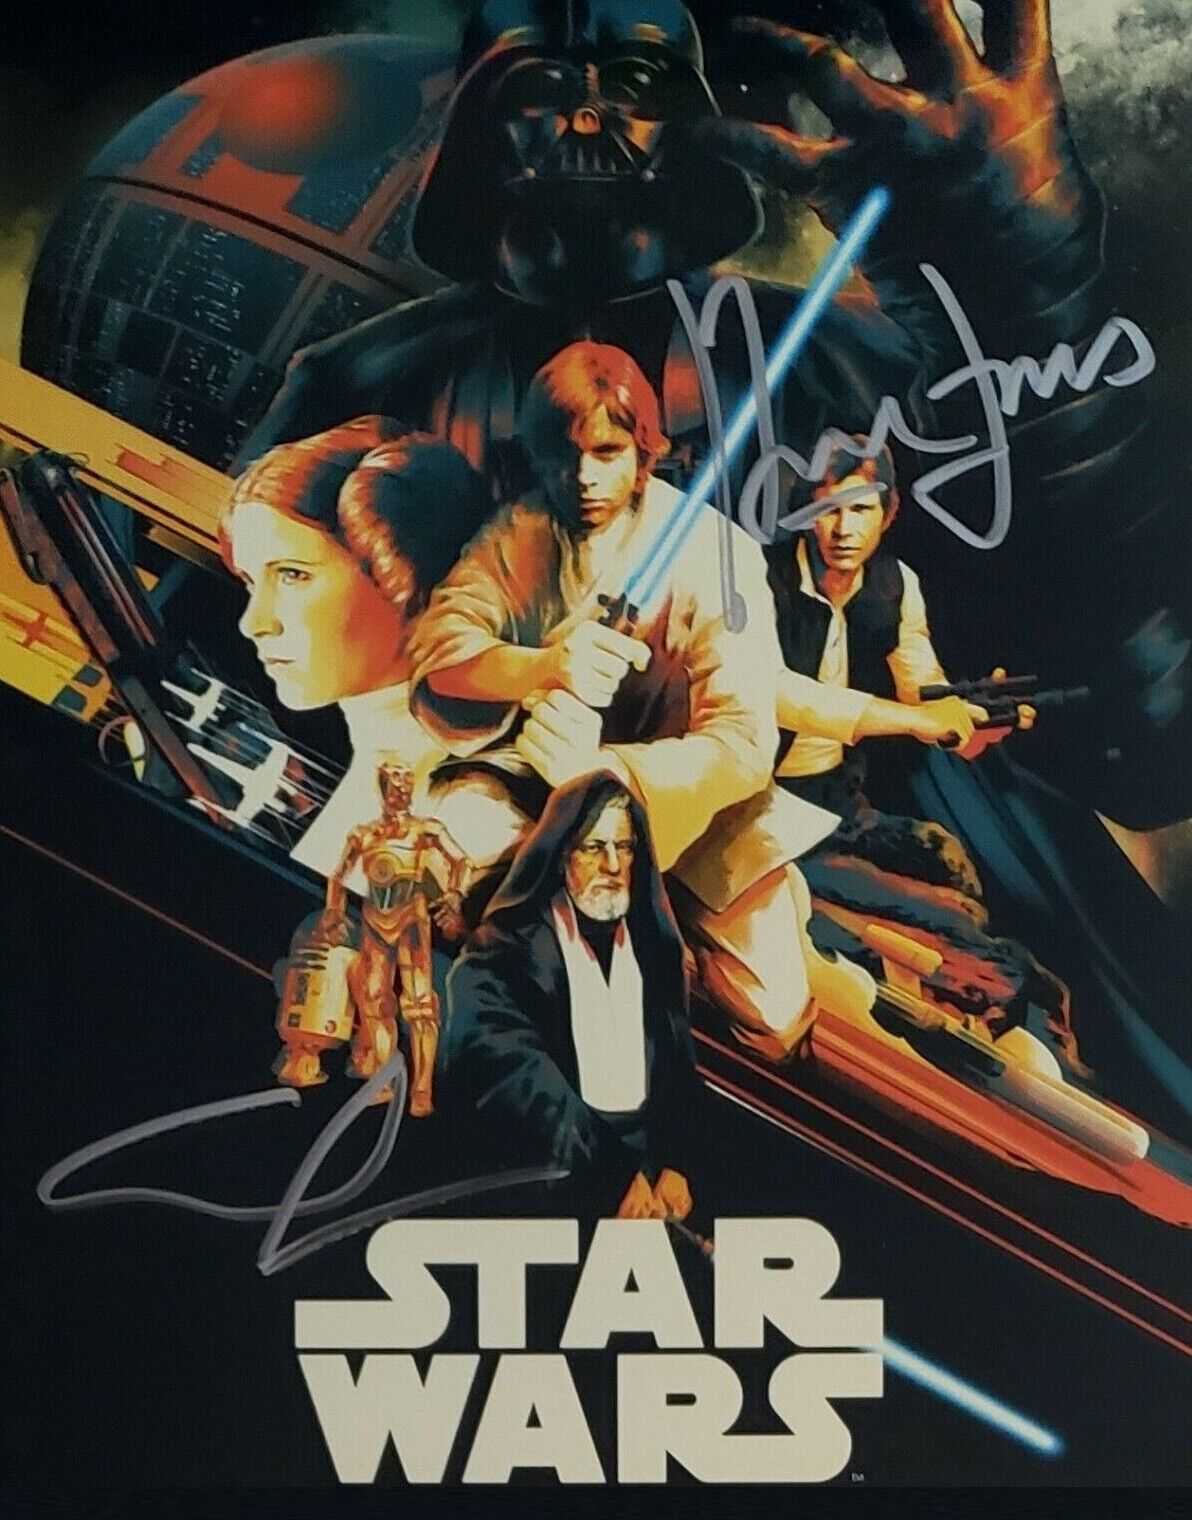 George Lucas / Harrison Ford Autographed Signed 8x10 Photo Poster painting ( Star Wars ) REPRINT